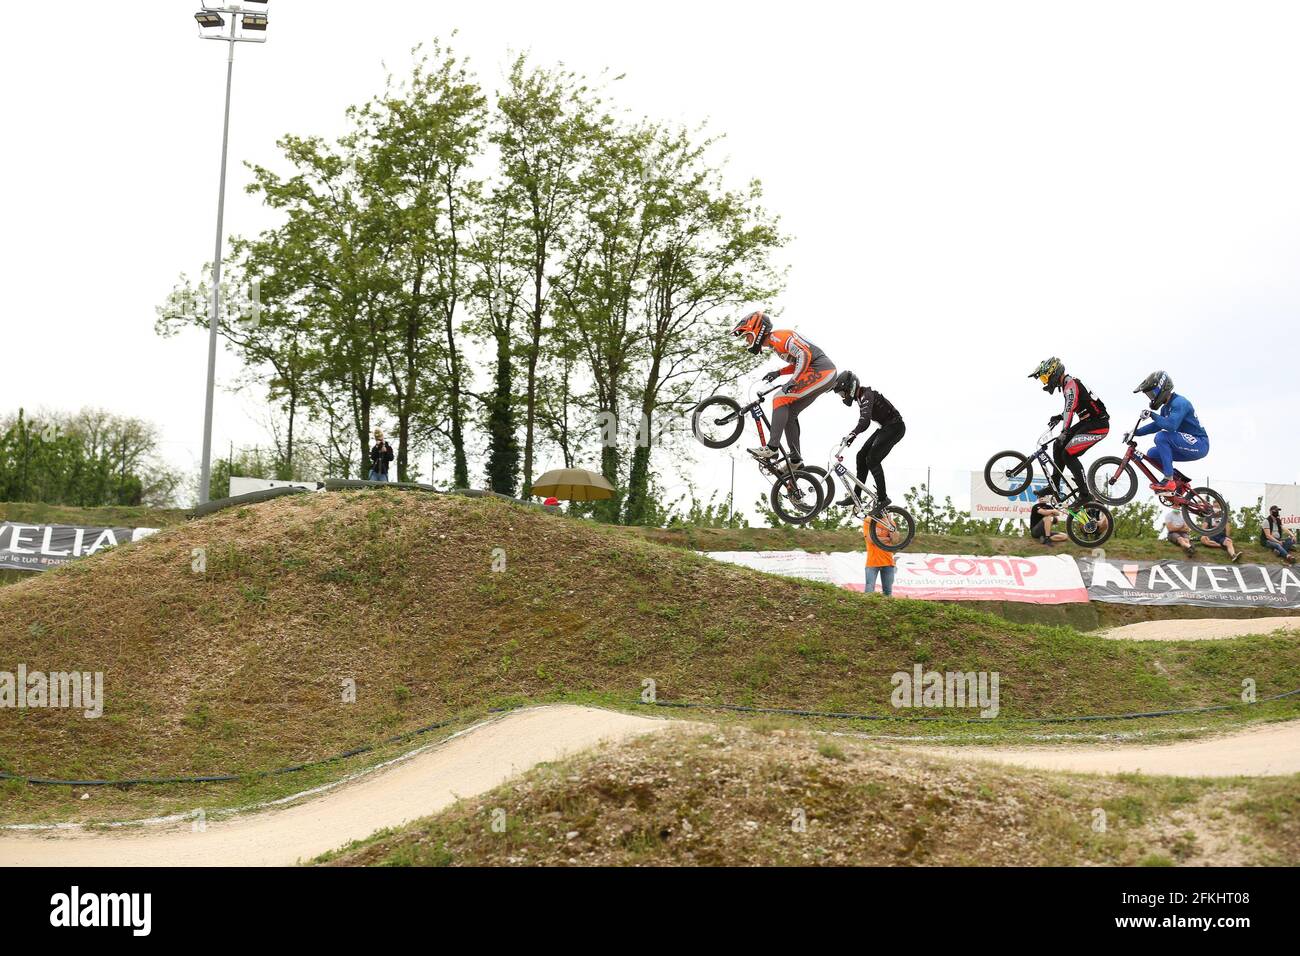 Verona, Italy. 01st May, 2021. Niek KIMMAN of Netherlands (313) competes in the BMX Racing Men Elite Round 1 of the UEC European Cup at the BMX Olympic Arena on May 1st 2021 in Verona, Italy Credit: Mickael Chavet/Alamy Live News Stock Photo